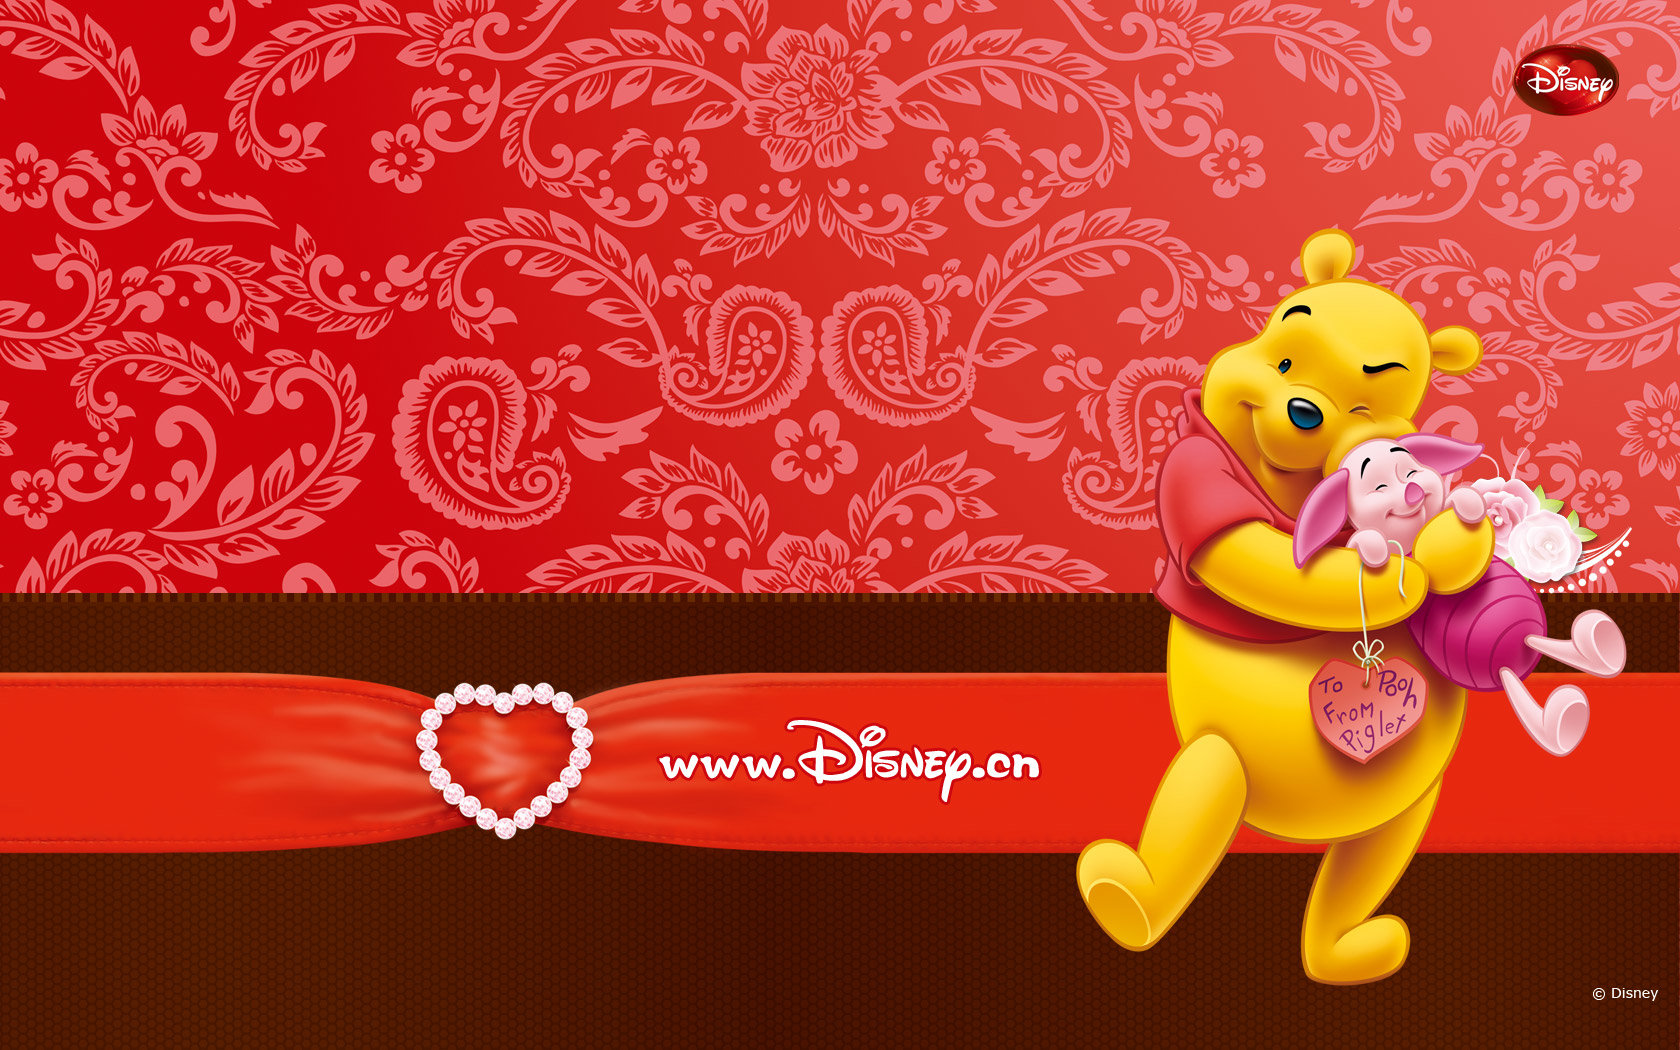 Best Winnie The Pooh Wallpaper Id - Android Winnie The Pooh Backgrounds - HD Wallpaper 